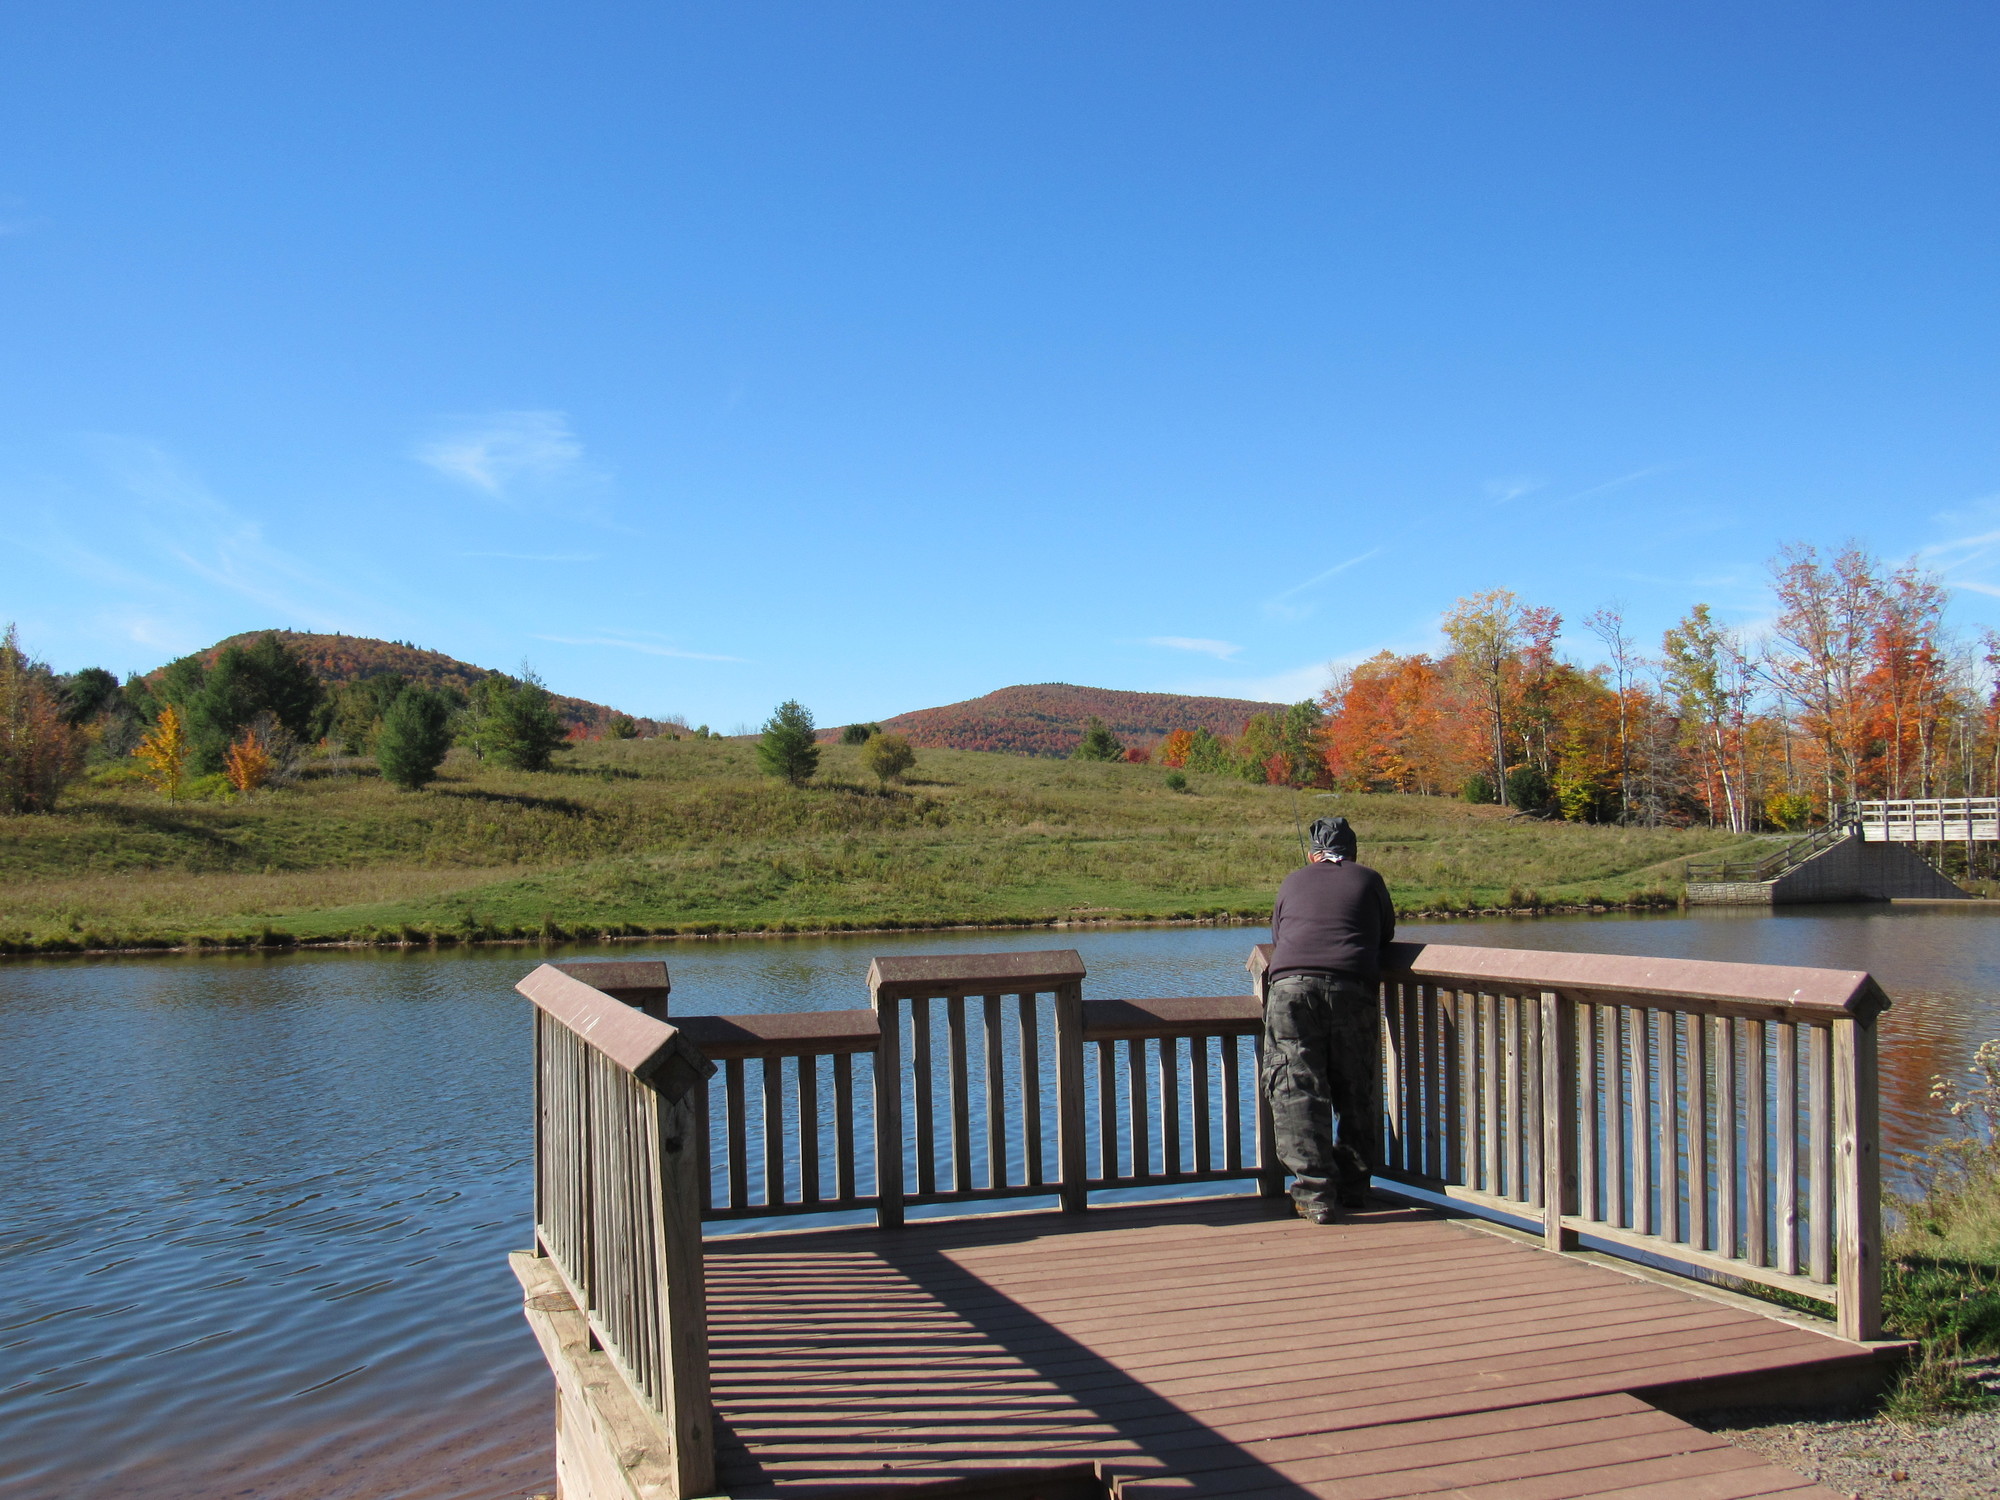 Person fishing from the Colgate Lake platform.